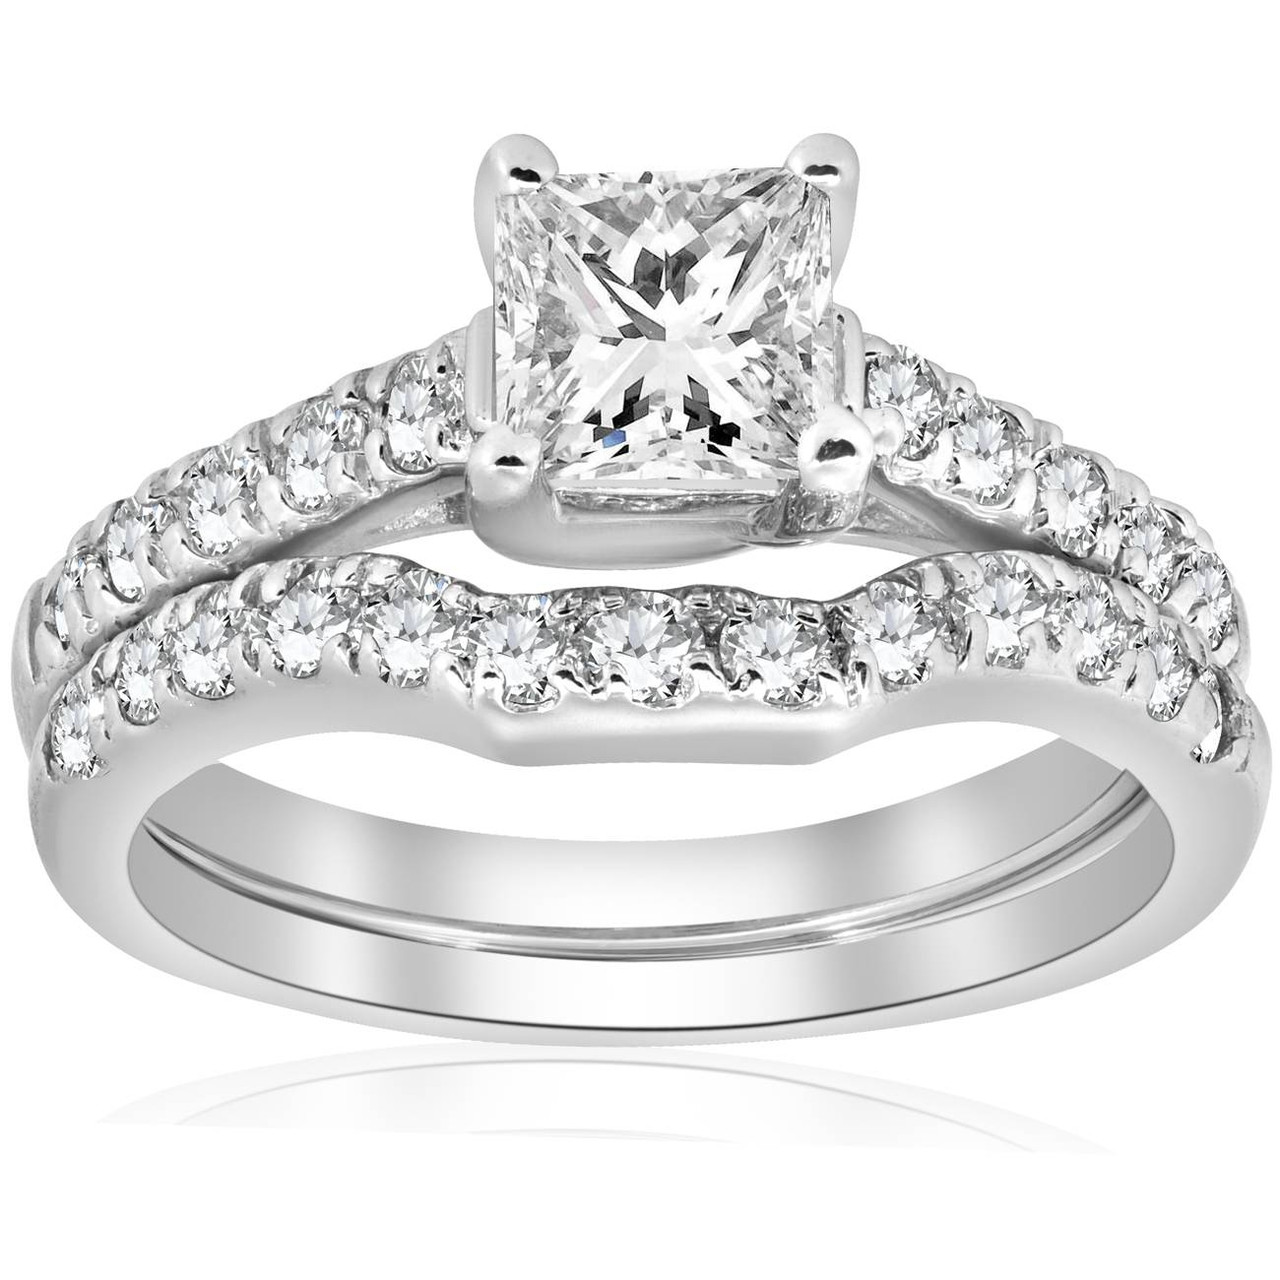 Engagement Ring and Wedding Band Set, Bridal Sets Rings for Women